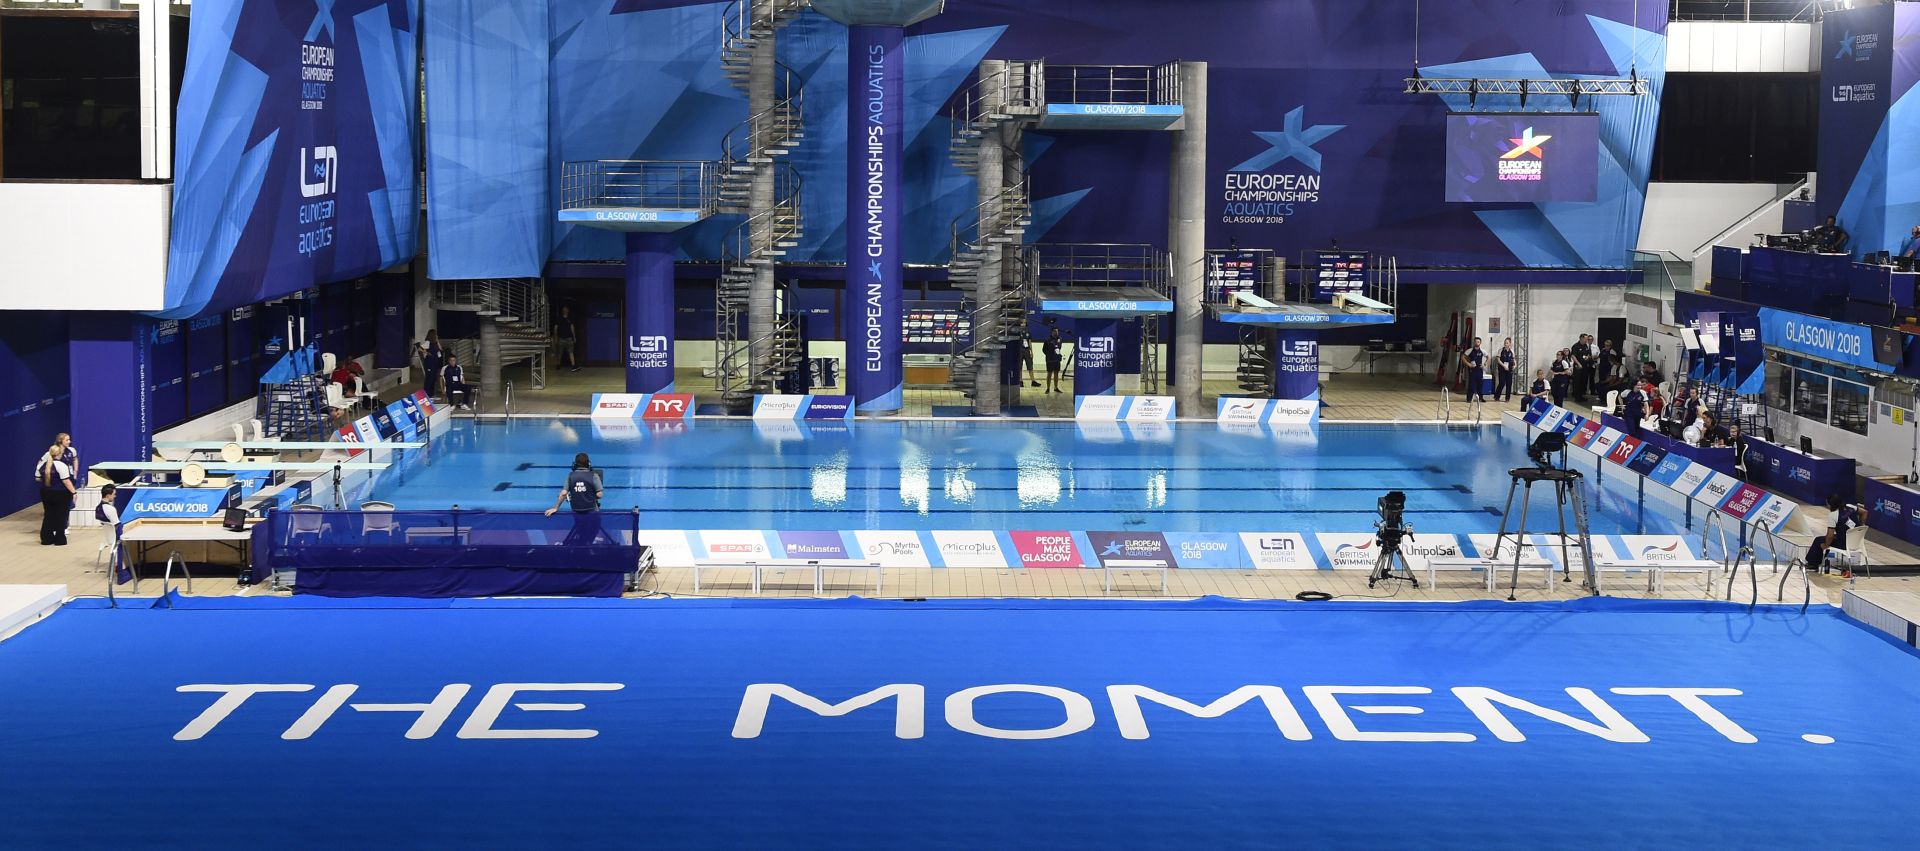 epa06930727 A general view of the Royal Commonwealth Pool in Edinburgh, which is hosting the Diving Competitions during the Glasgow 2018 European Diving Championships, Edinburgh, Britain, 06 August 2018.  EPA/WILL OLIVER